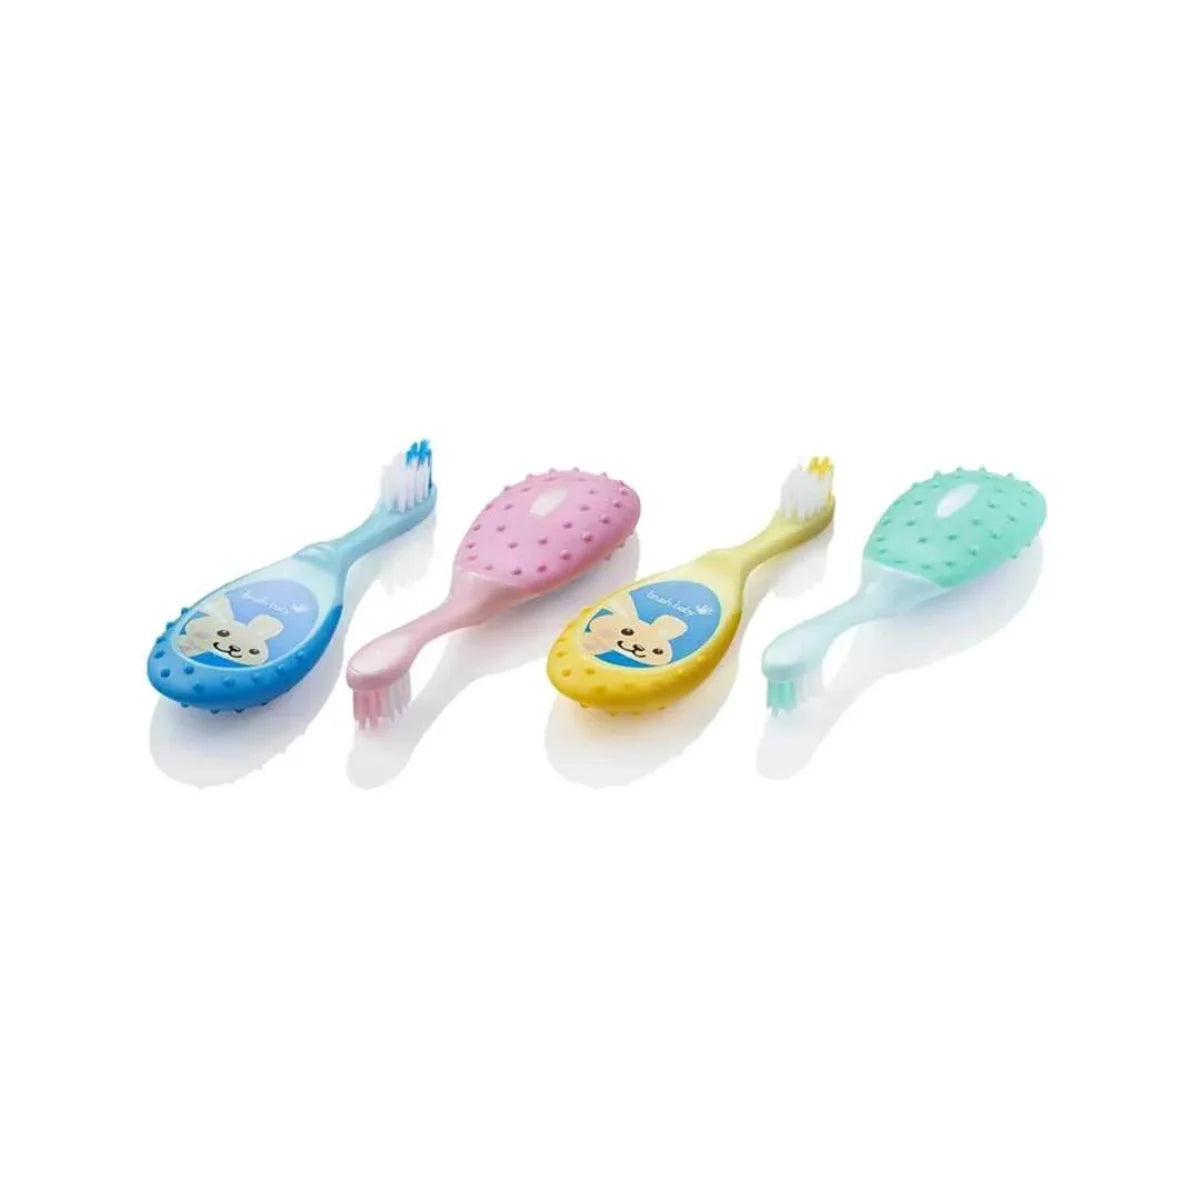 easy to hold manual FlossBrushes baby soft bristles toothbrush in blue, pink, yellow and teal